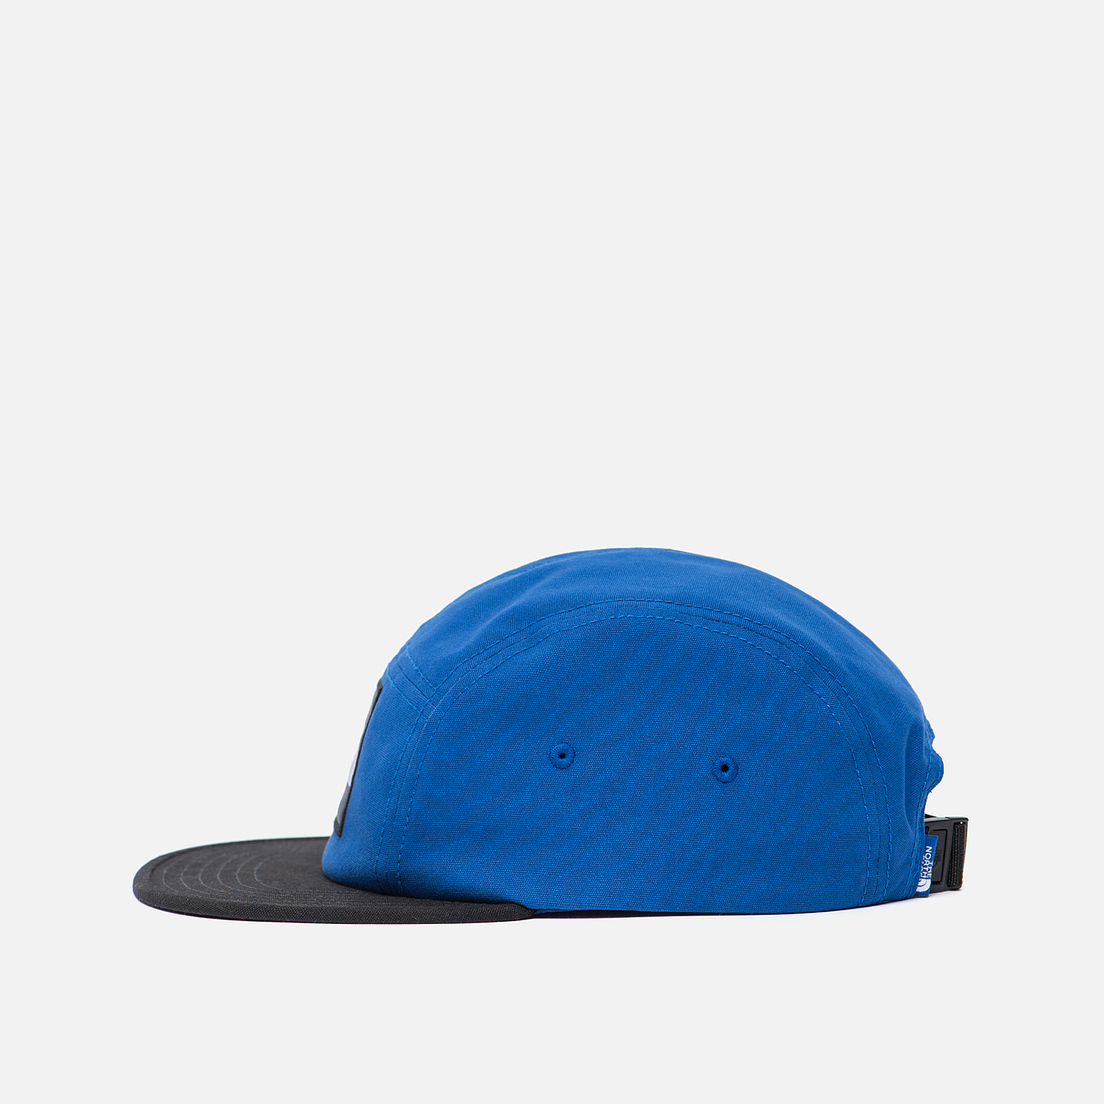 The North Face Кепка Five Panel